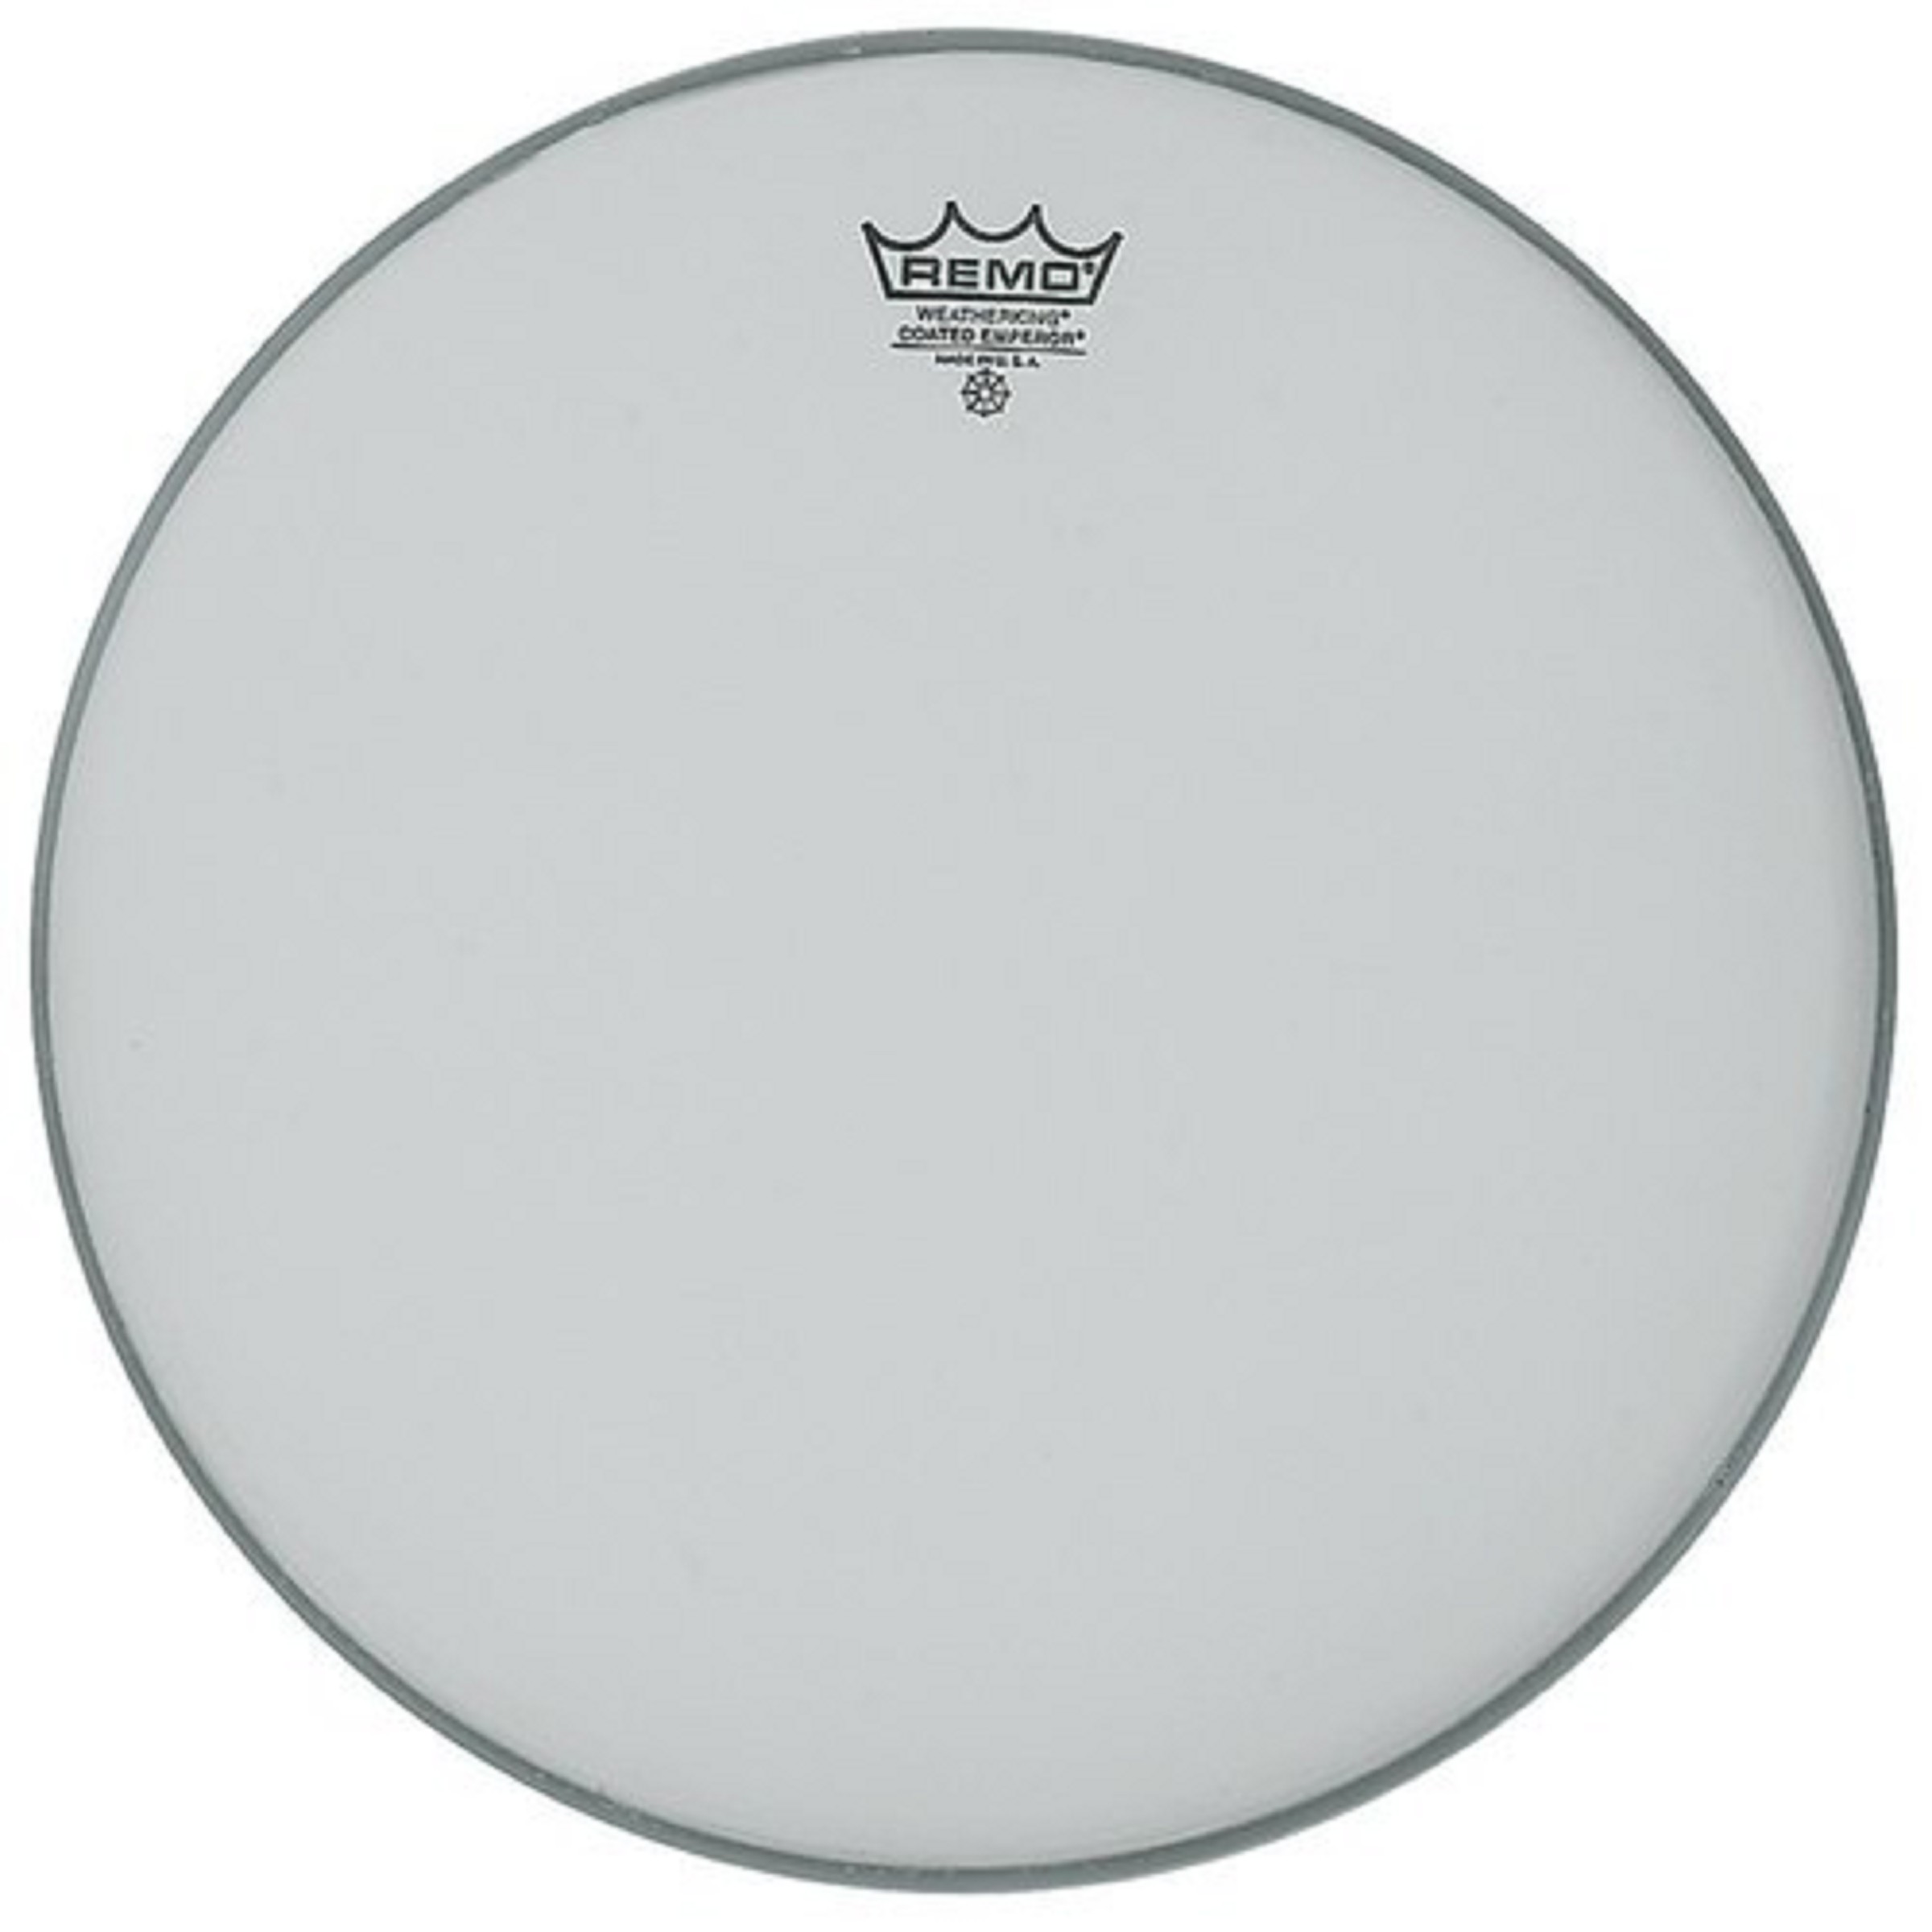 Remo Fell Emperor 18" Coated